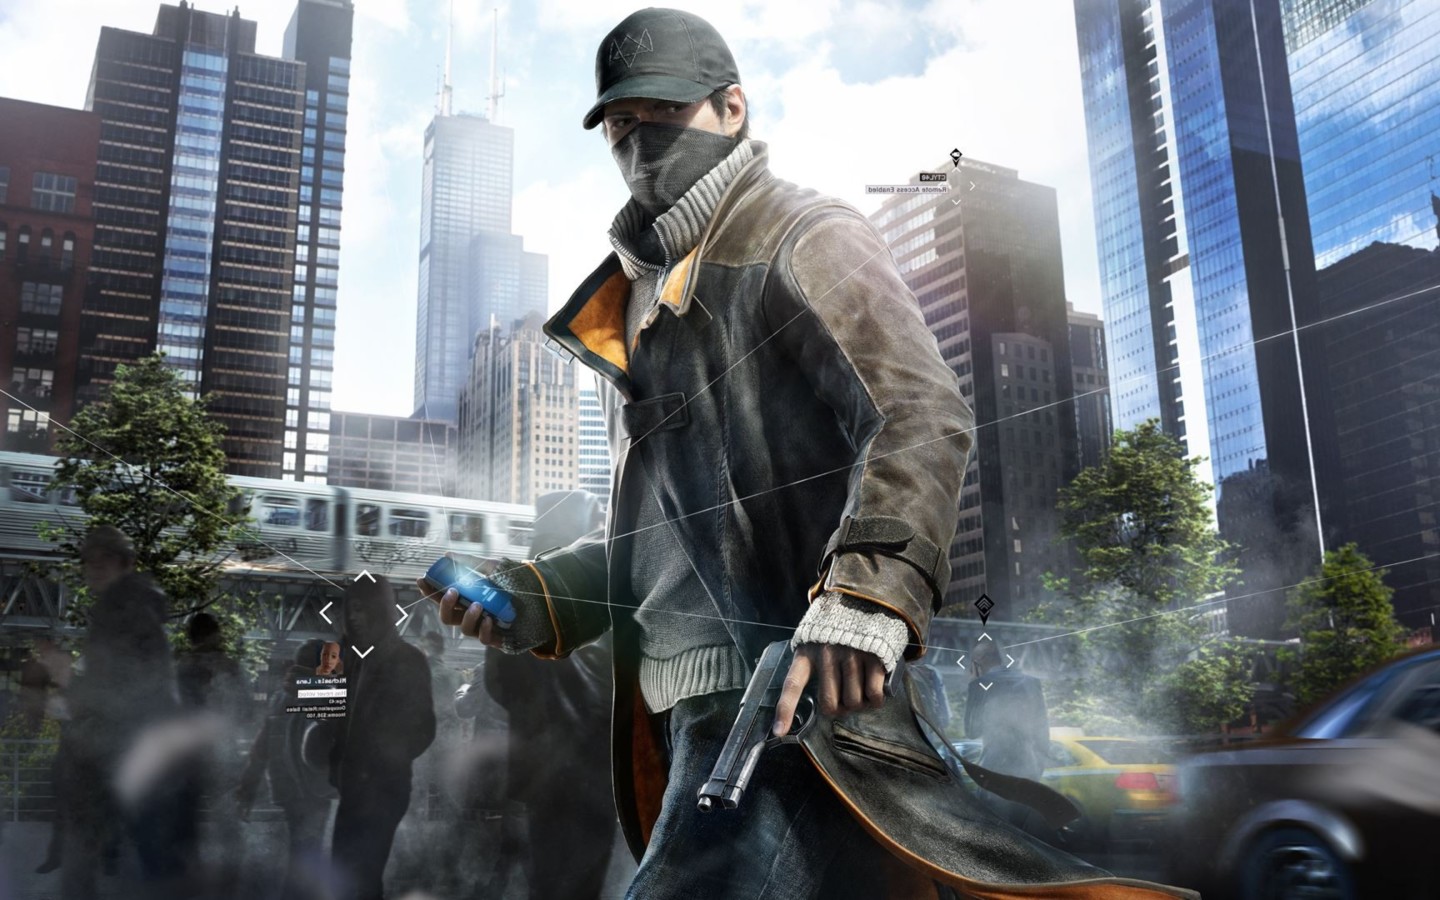 watch dogs 2 wallpaper 4k,action adventure game,pc game,outerwear,screenshot,games